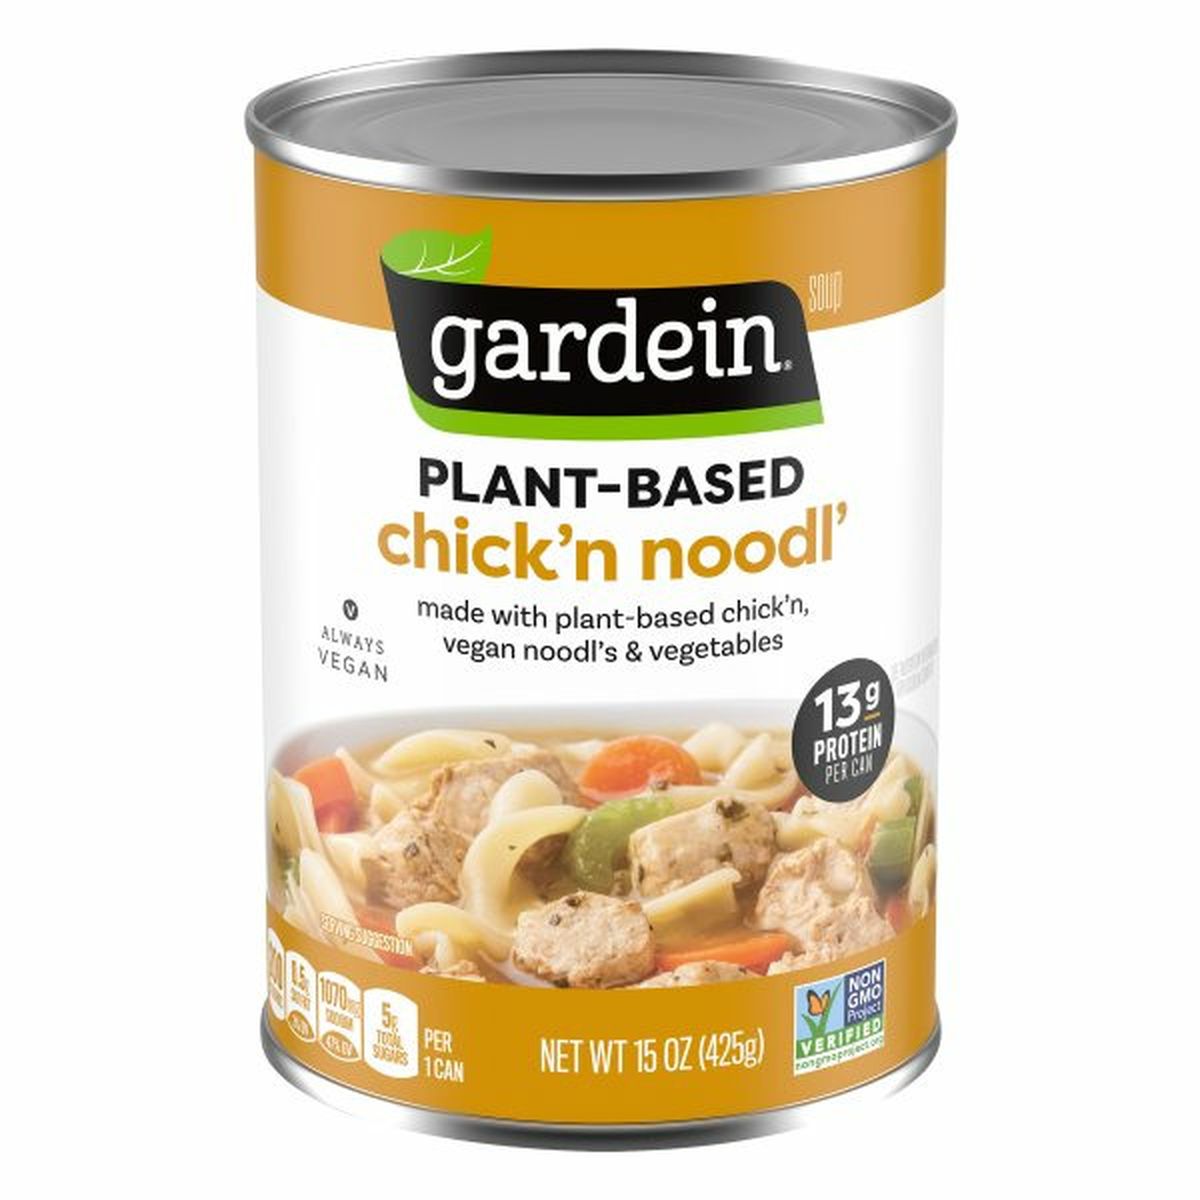 Calories in gardein Soup, Chick'n Noodl', Plant-Based